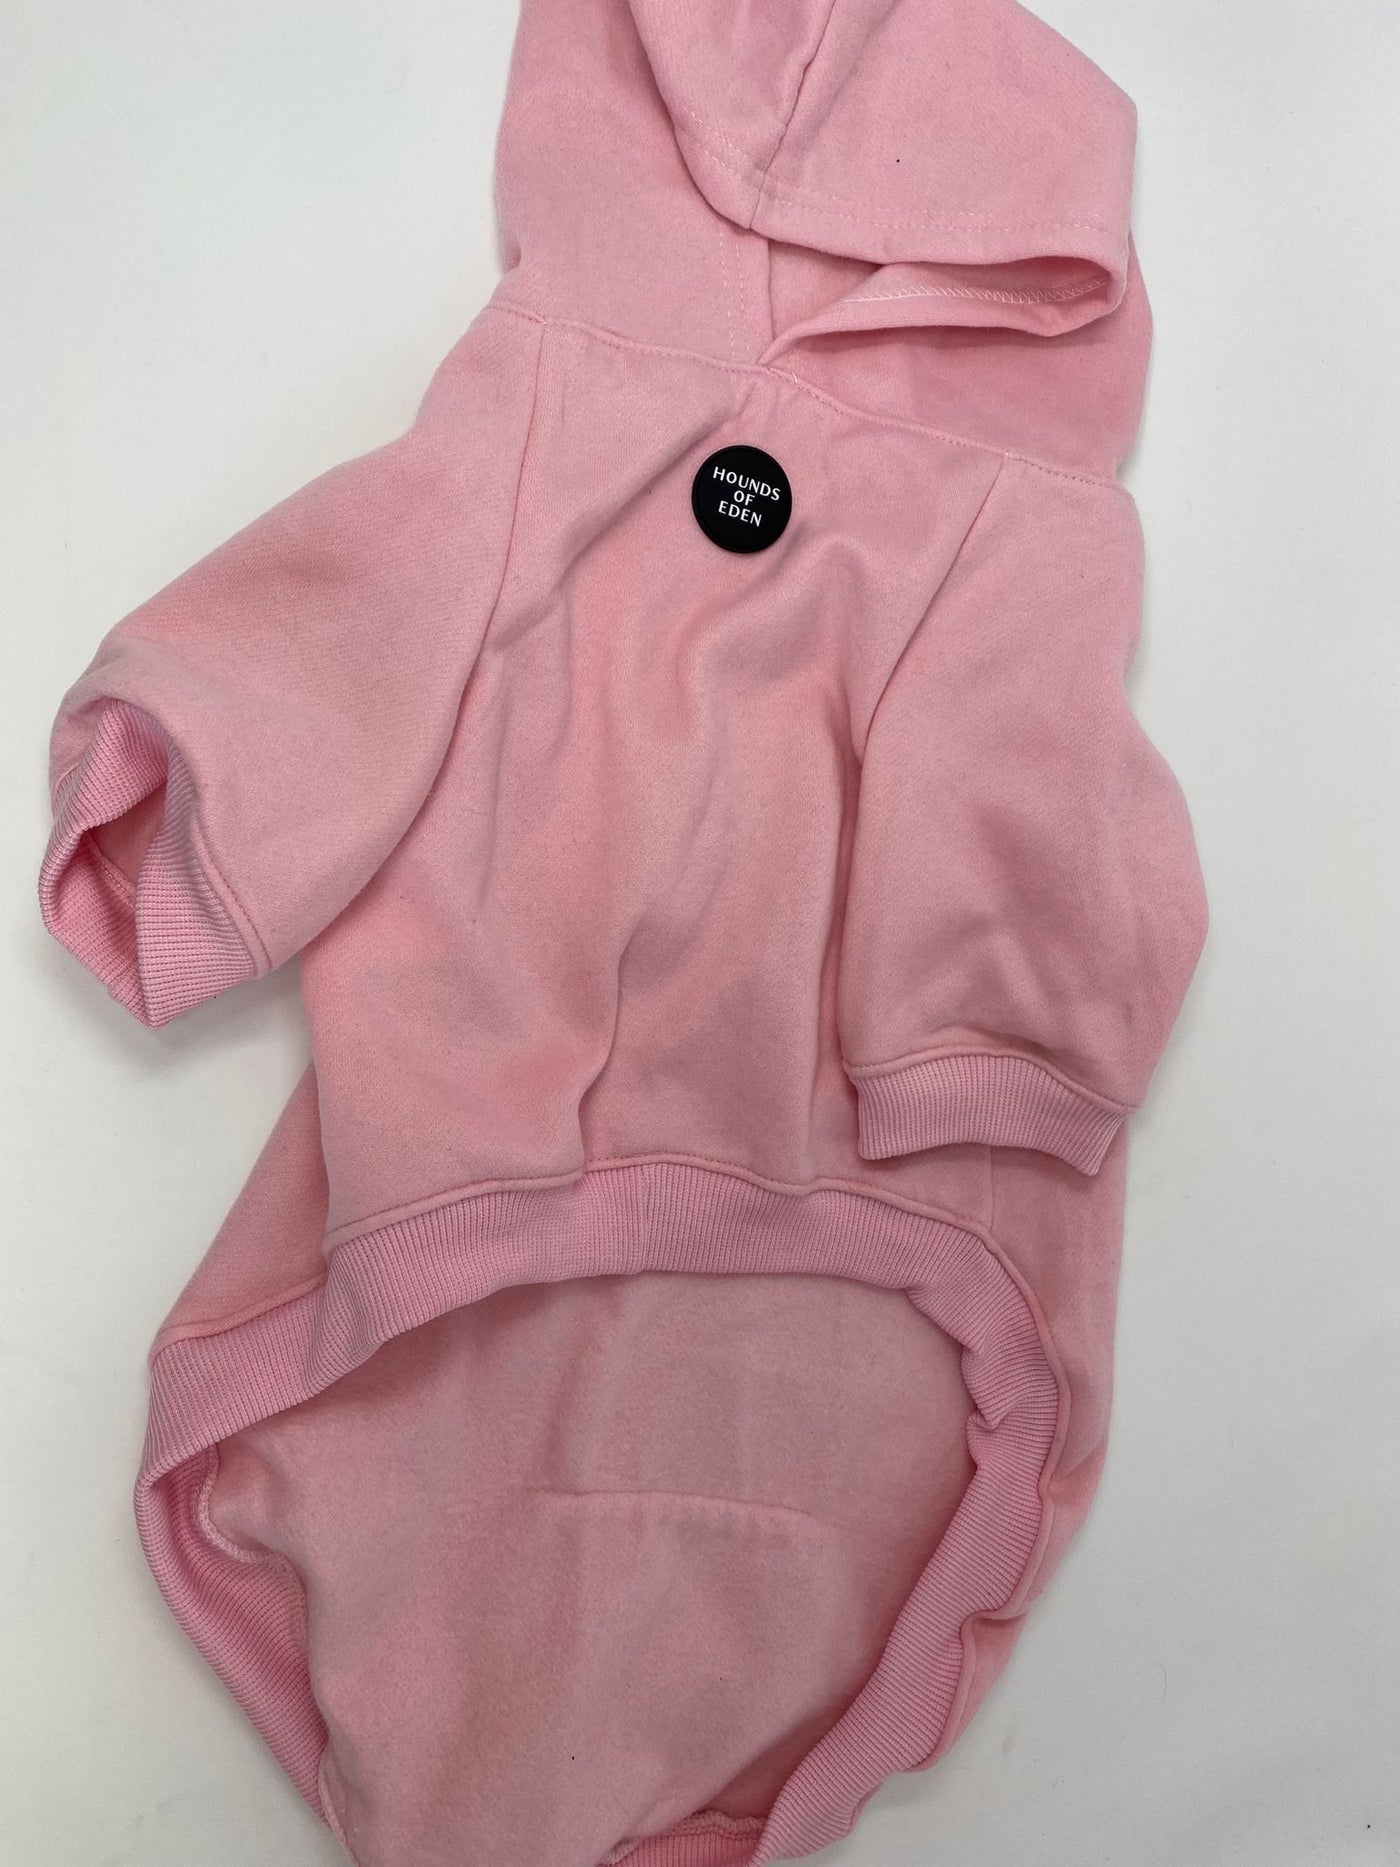 Outlet - 3XL DOG HOODIE - LIGHT PINK - 0049